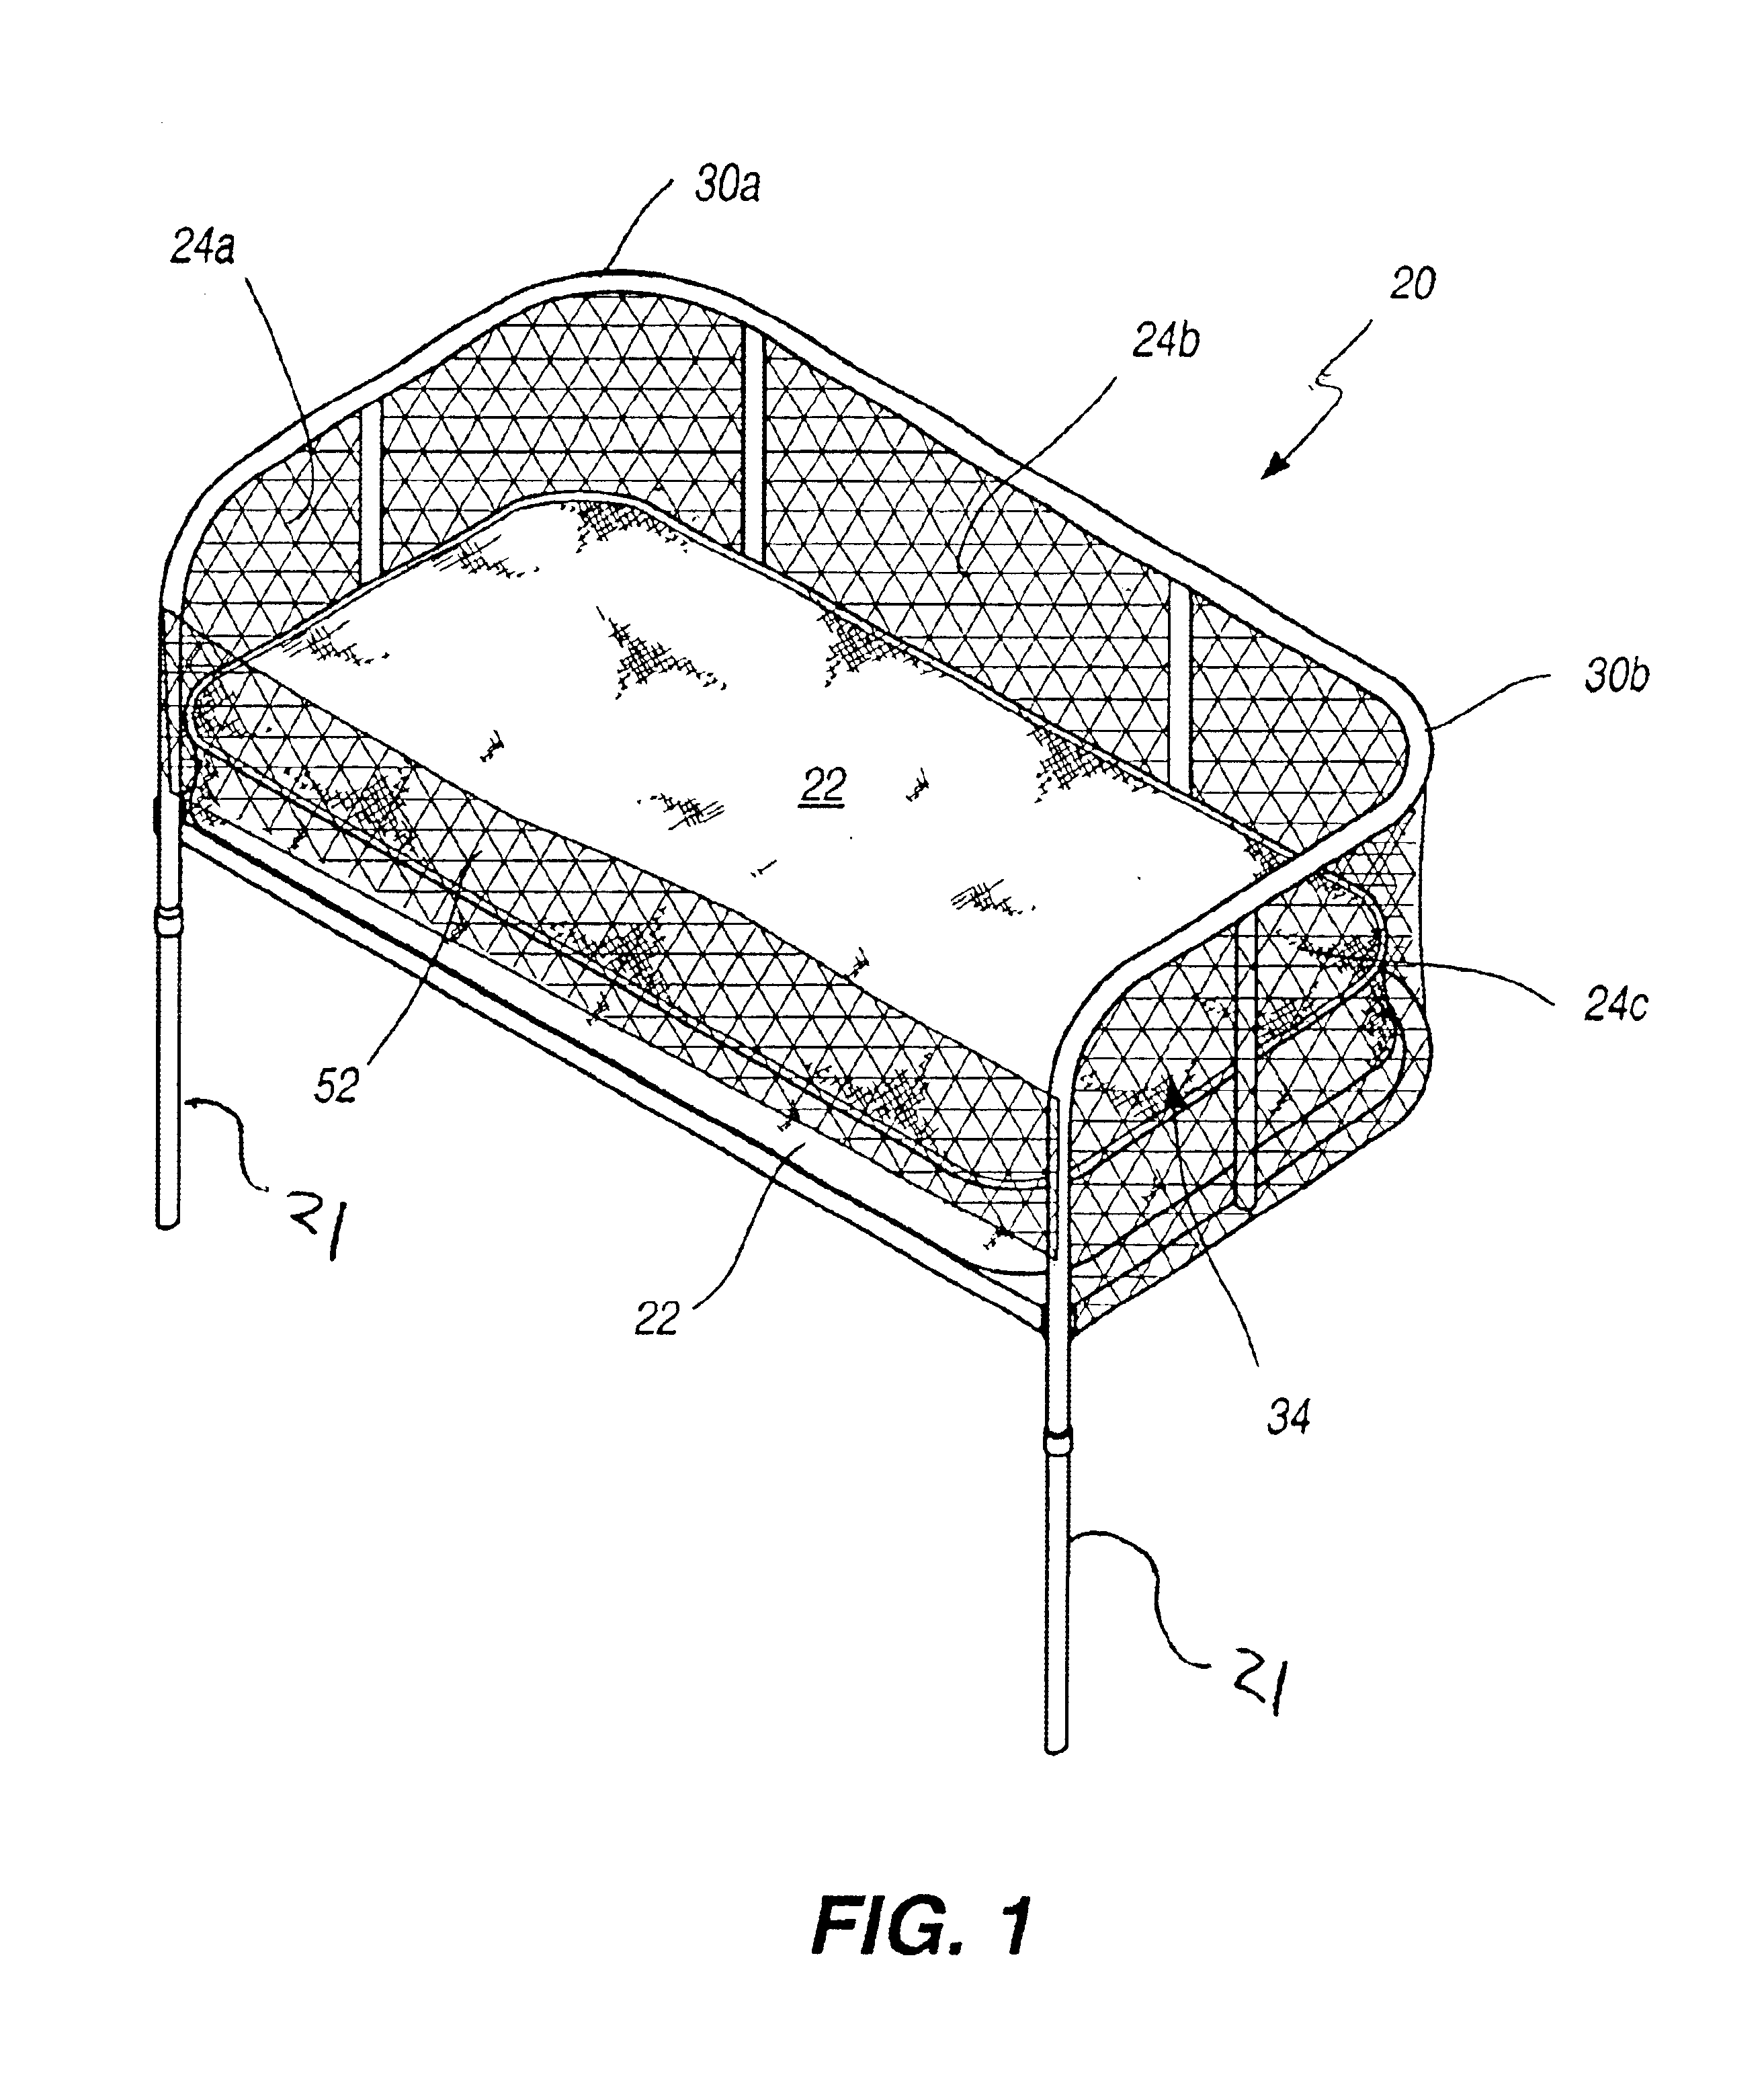 Infant and pet co-sleeper apparatus